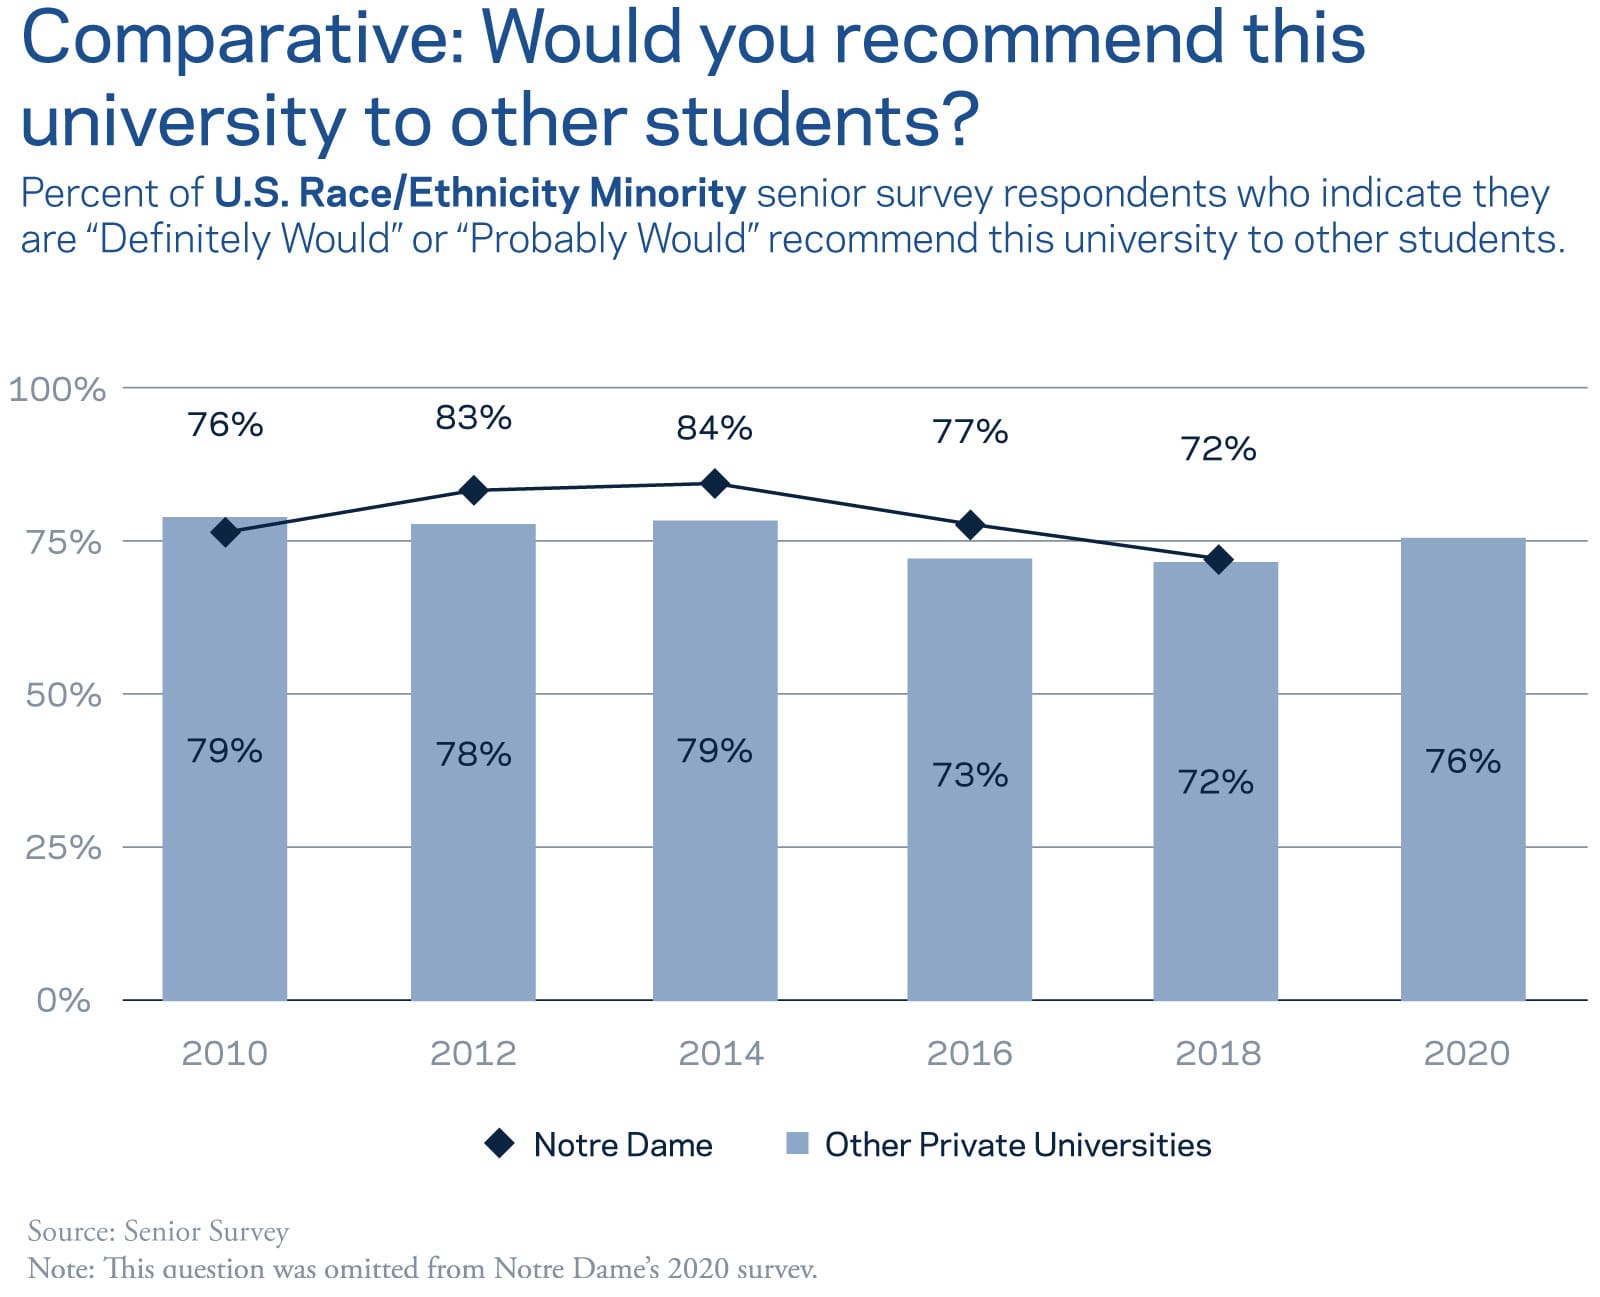 Comparative: Would you recommend this university to other students? - Percent of U.S. Race/Ethnicity Minority senior survey respondents who indicate they are Definitely Would or Probably Would recommend this university to other students.